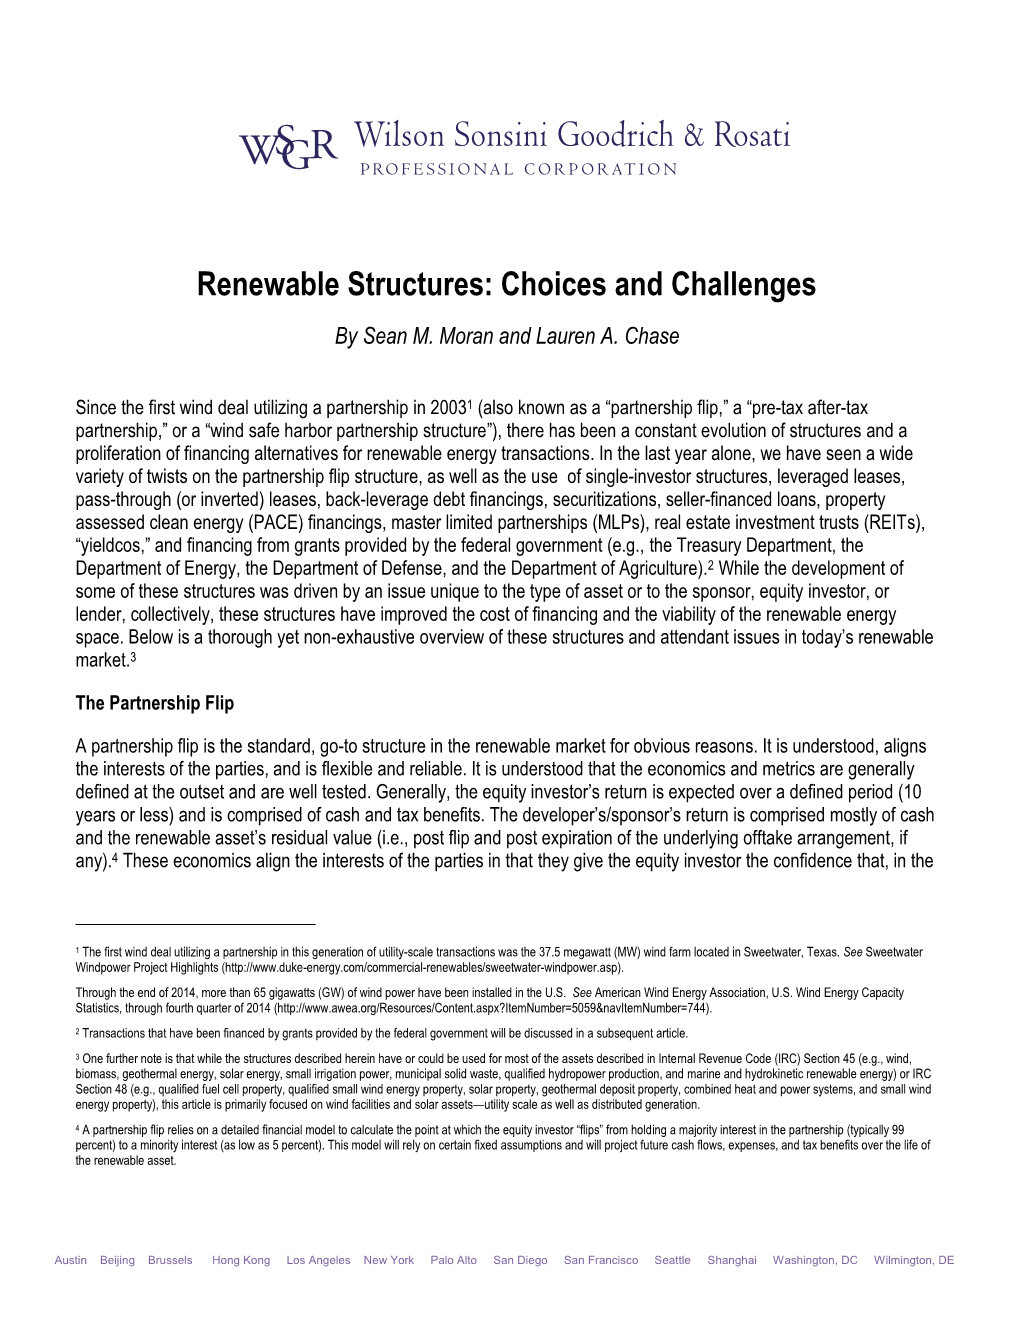 Renewable Structures: Choices and Challenges by Sean M